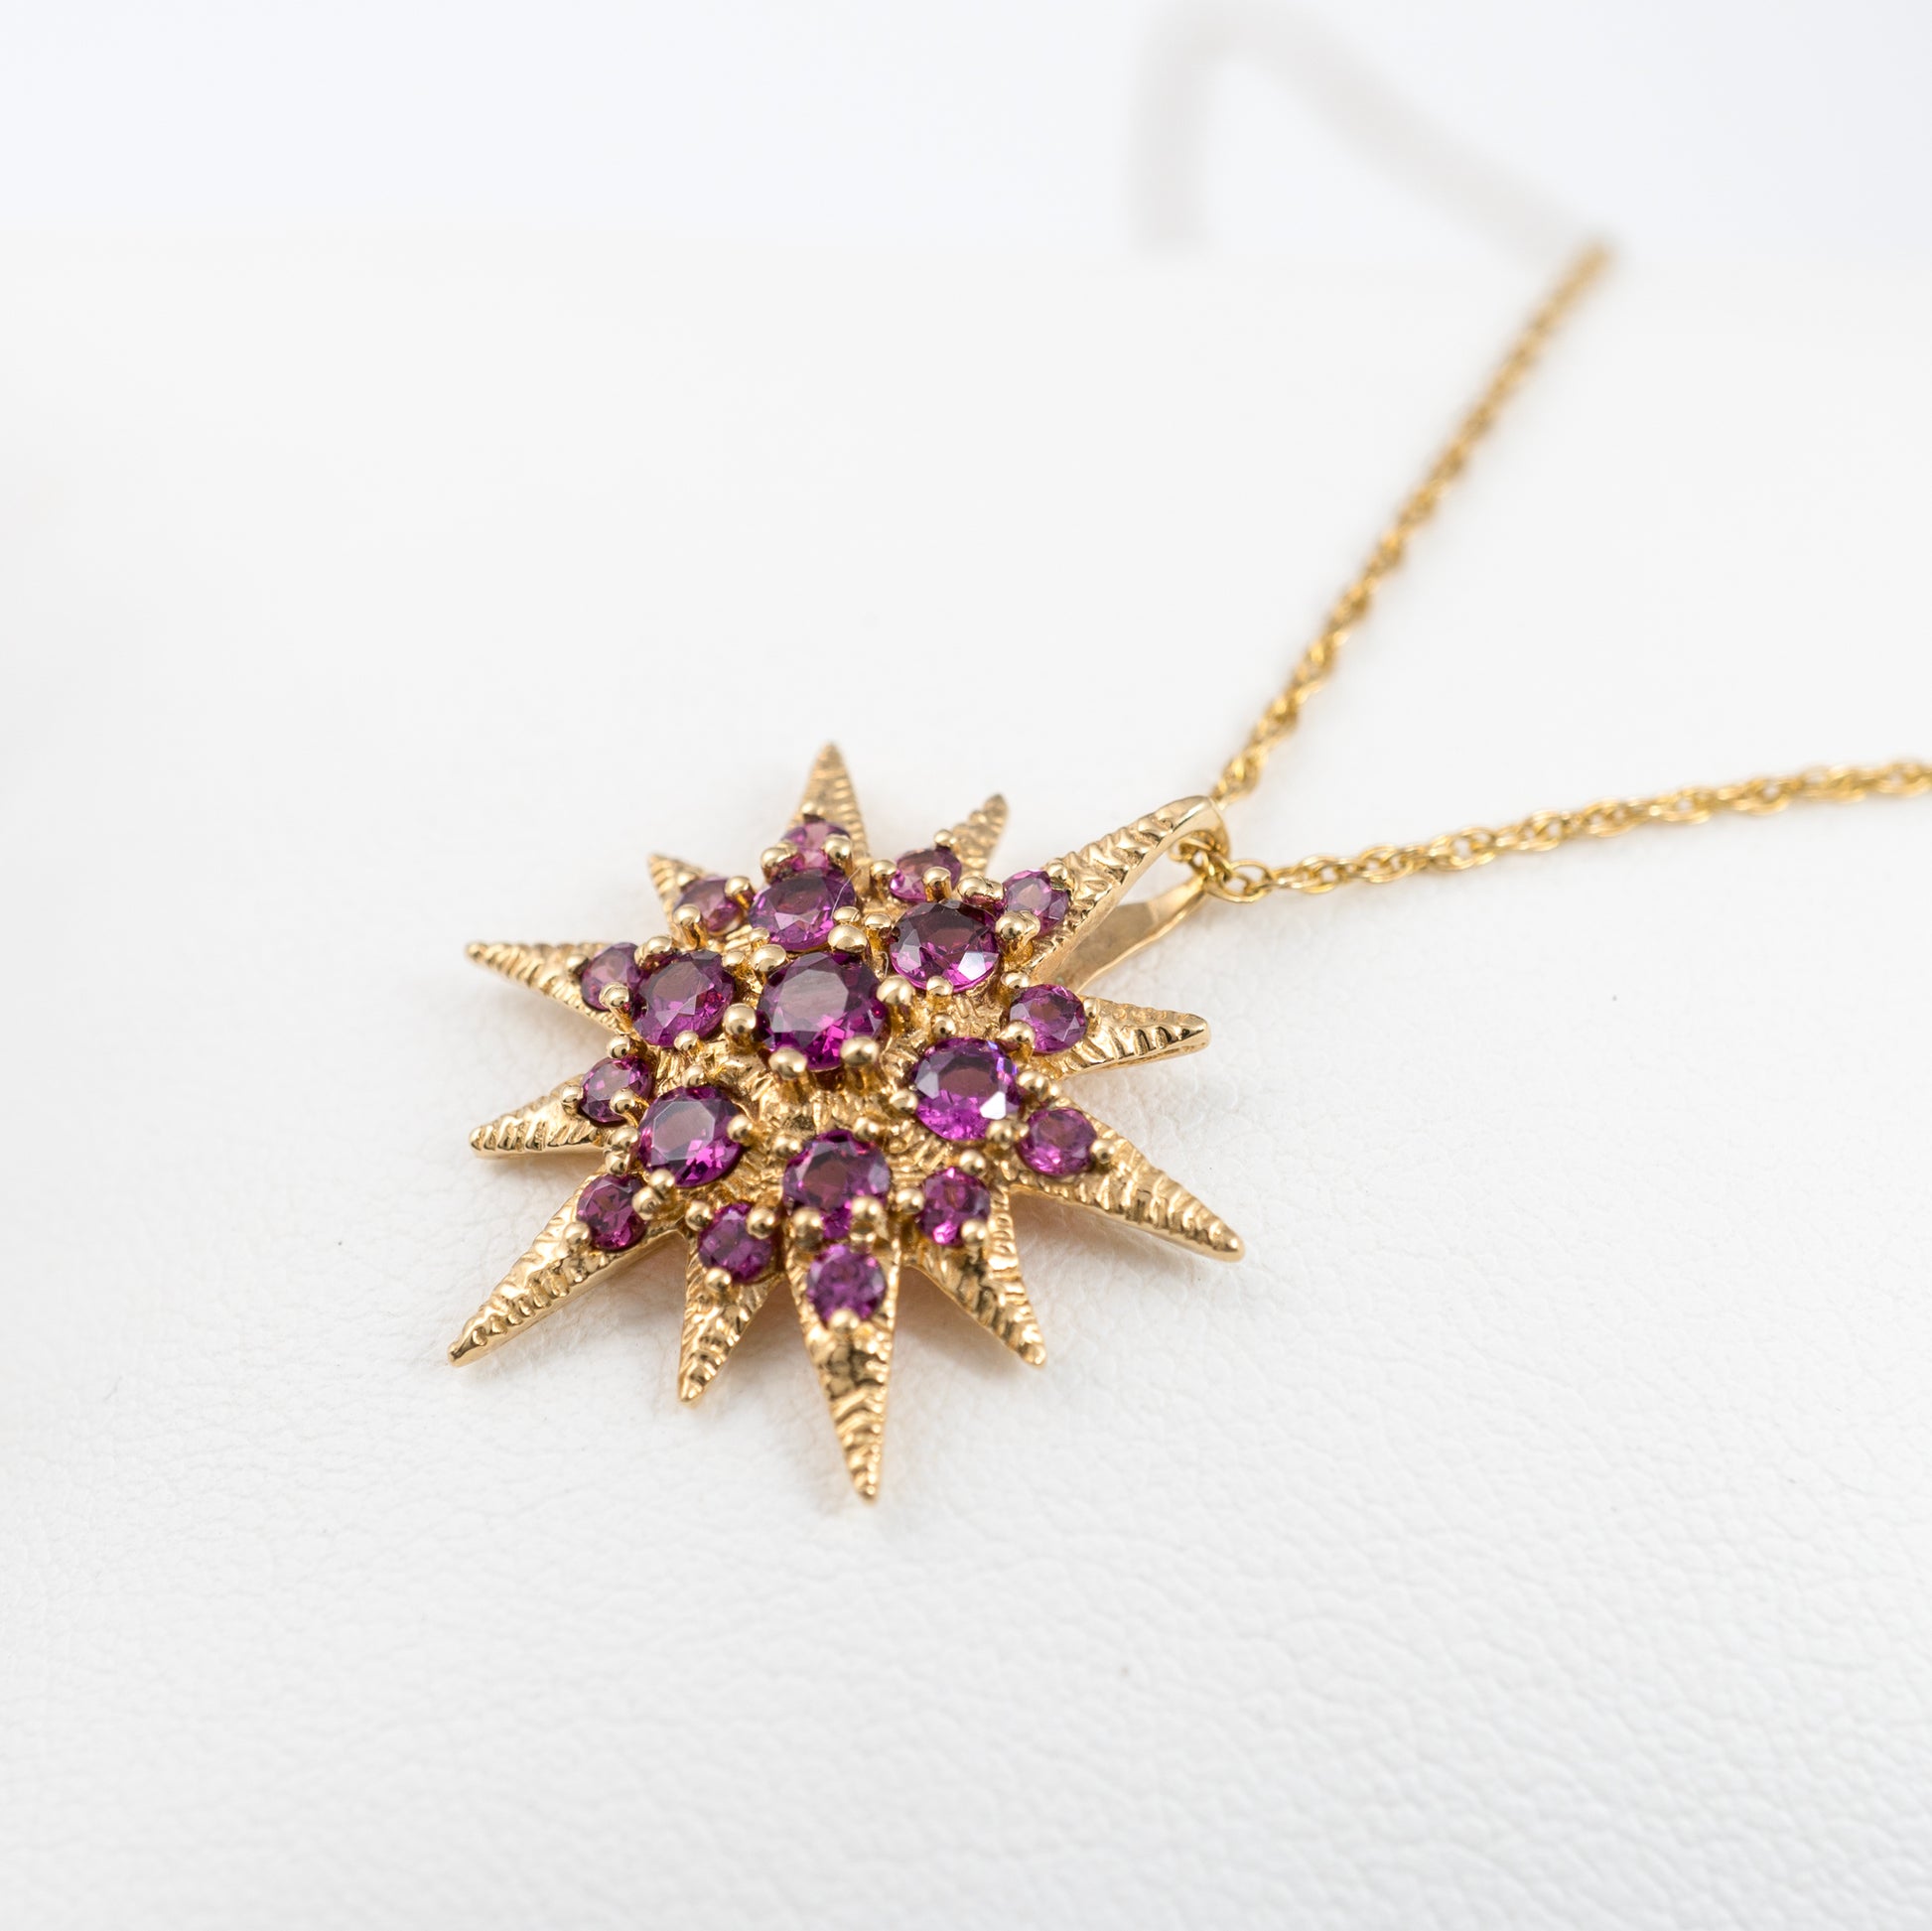 Gold Star Necklace Featuring Pink Topaz for a Chic Look